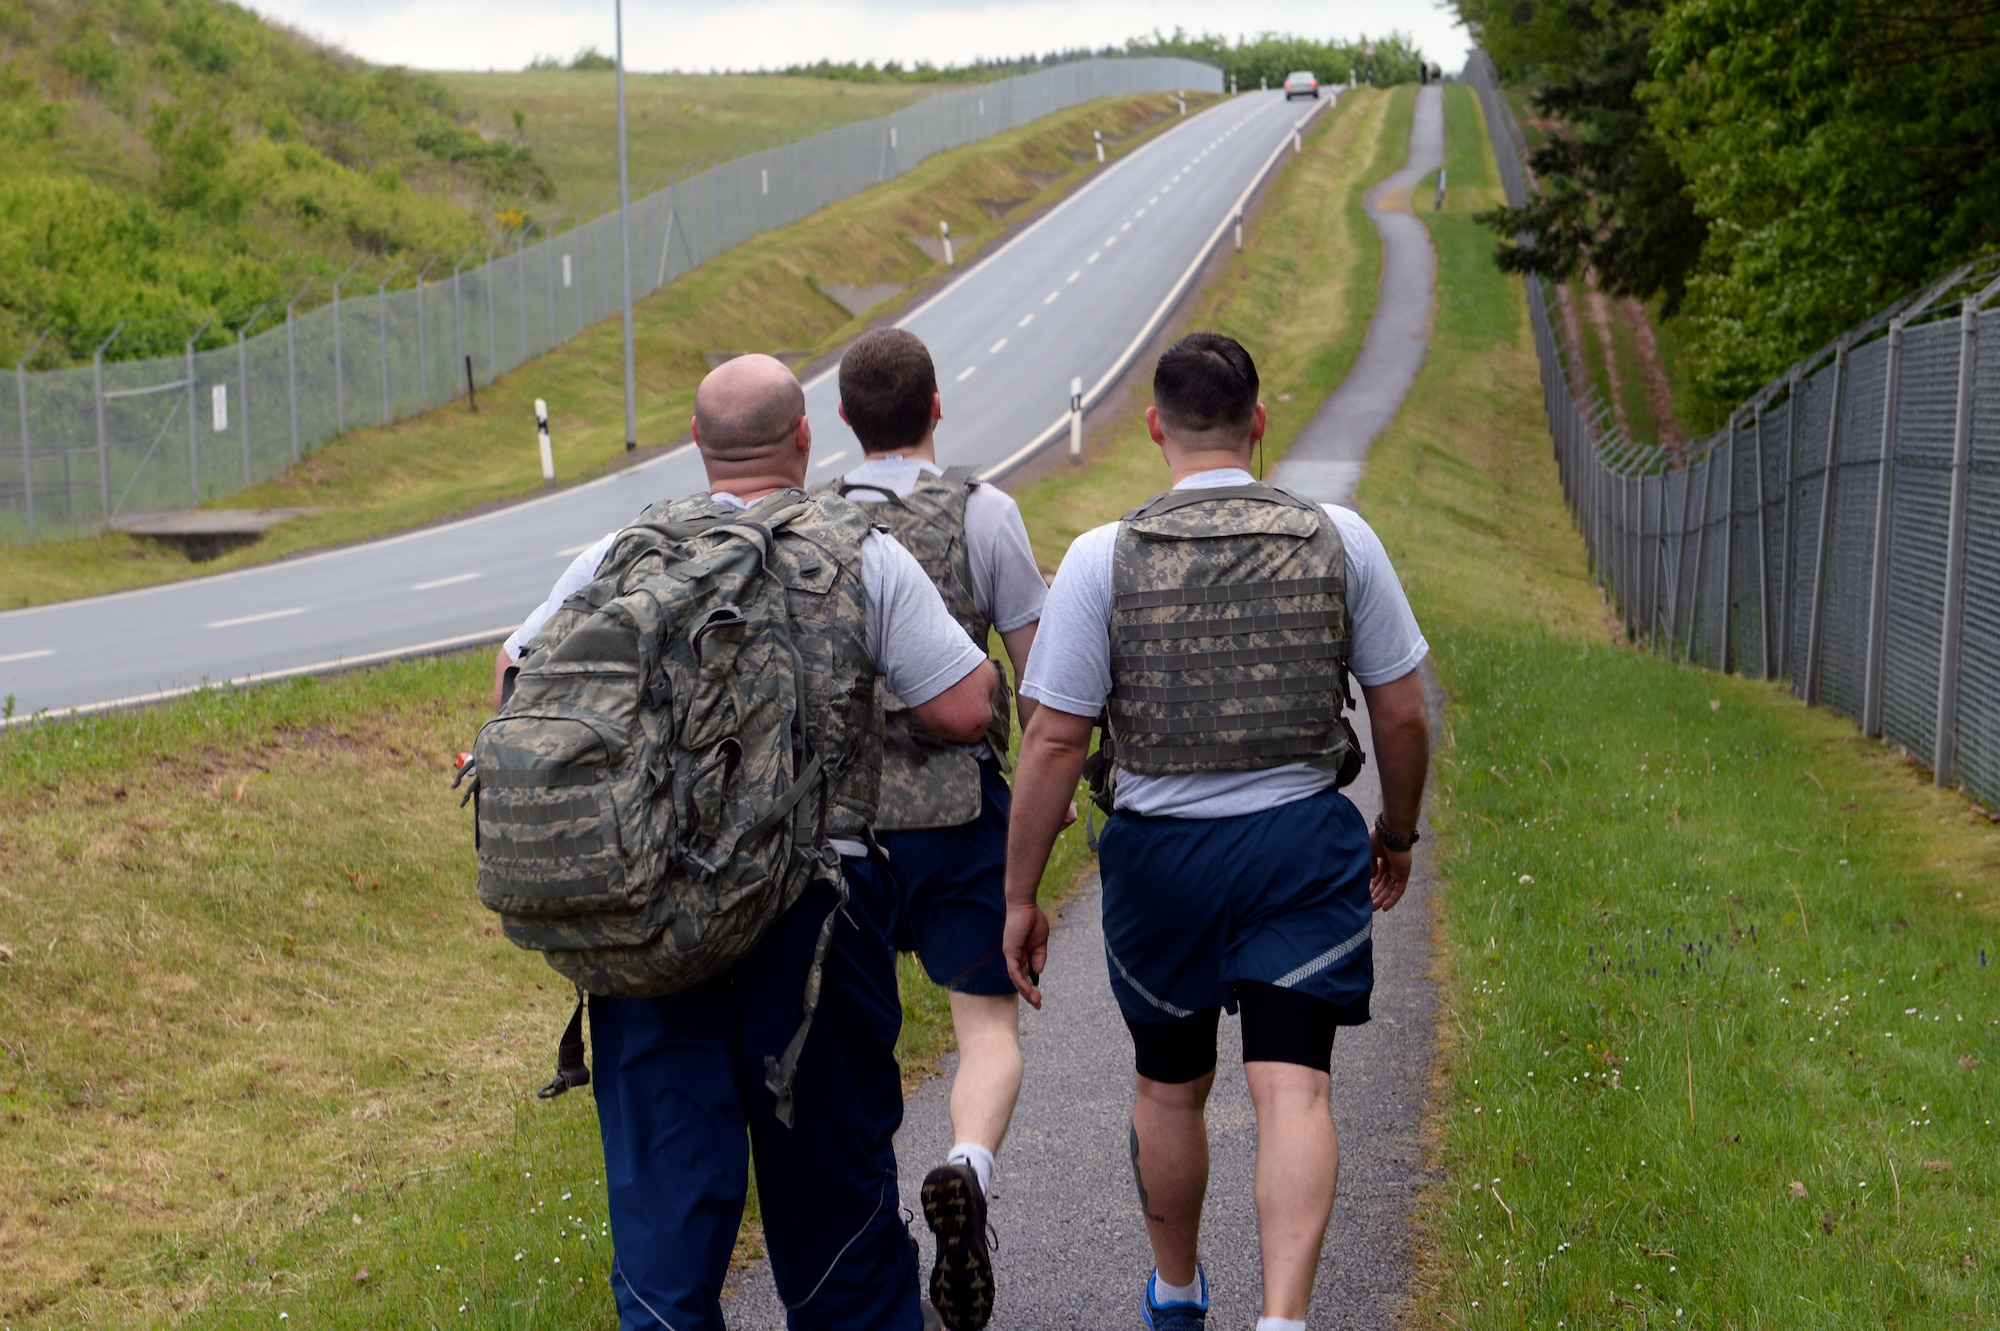 Three 52nd Security Forces Squadron patrolmen walk the perimeter of the base in the 10-kilometer Security Forces Memorial Ruck March at Spangdahlem Air Base, Germany, May 12, 2014. Participants were encouraged throughout the march to reflect on the loss of fallen security forces members. (U.S. Air Force photo by Senior Airman Alexis Siekert)